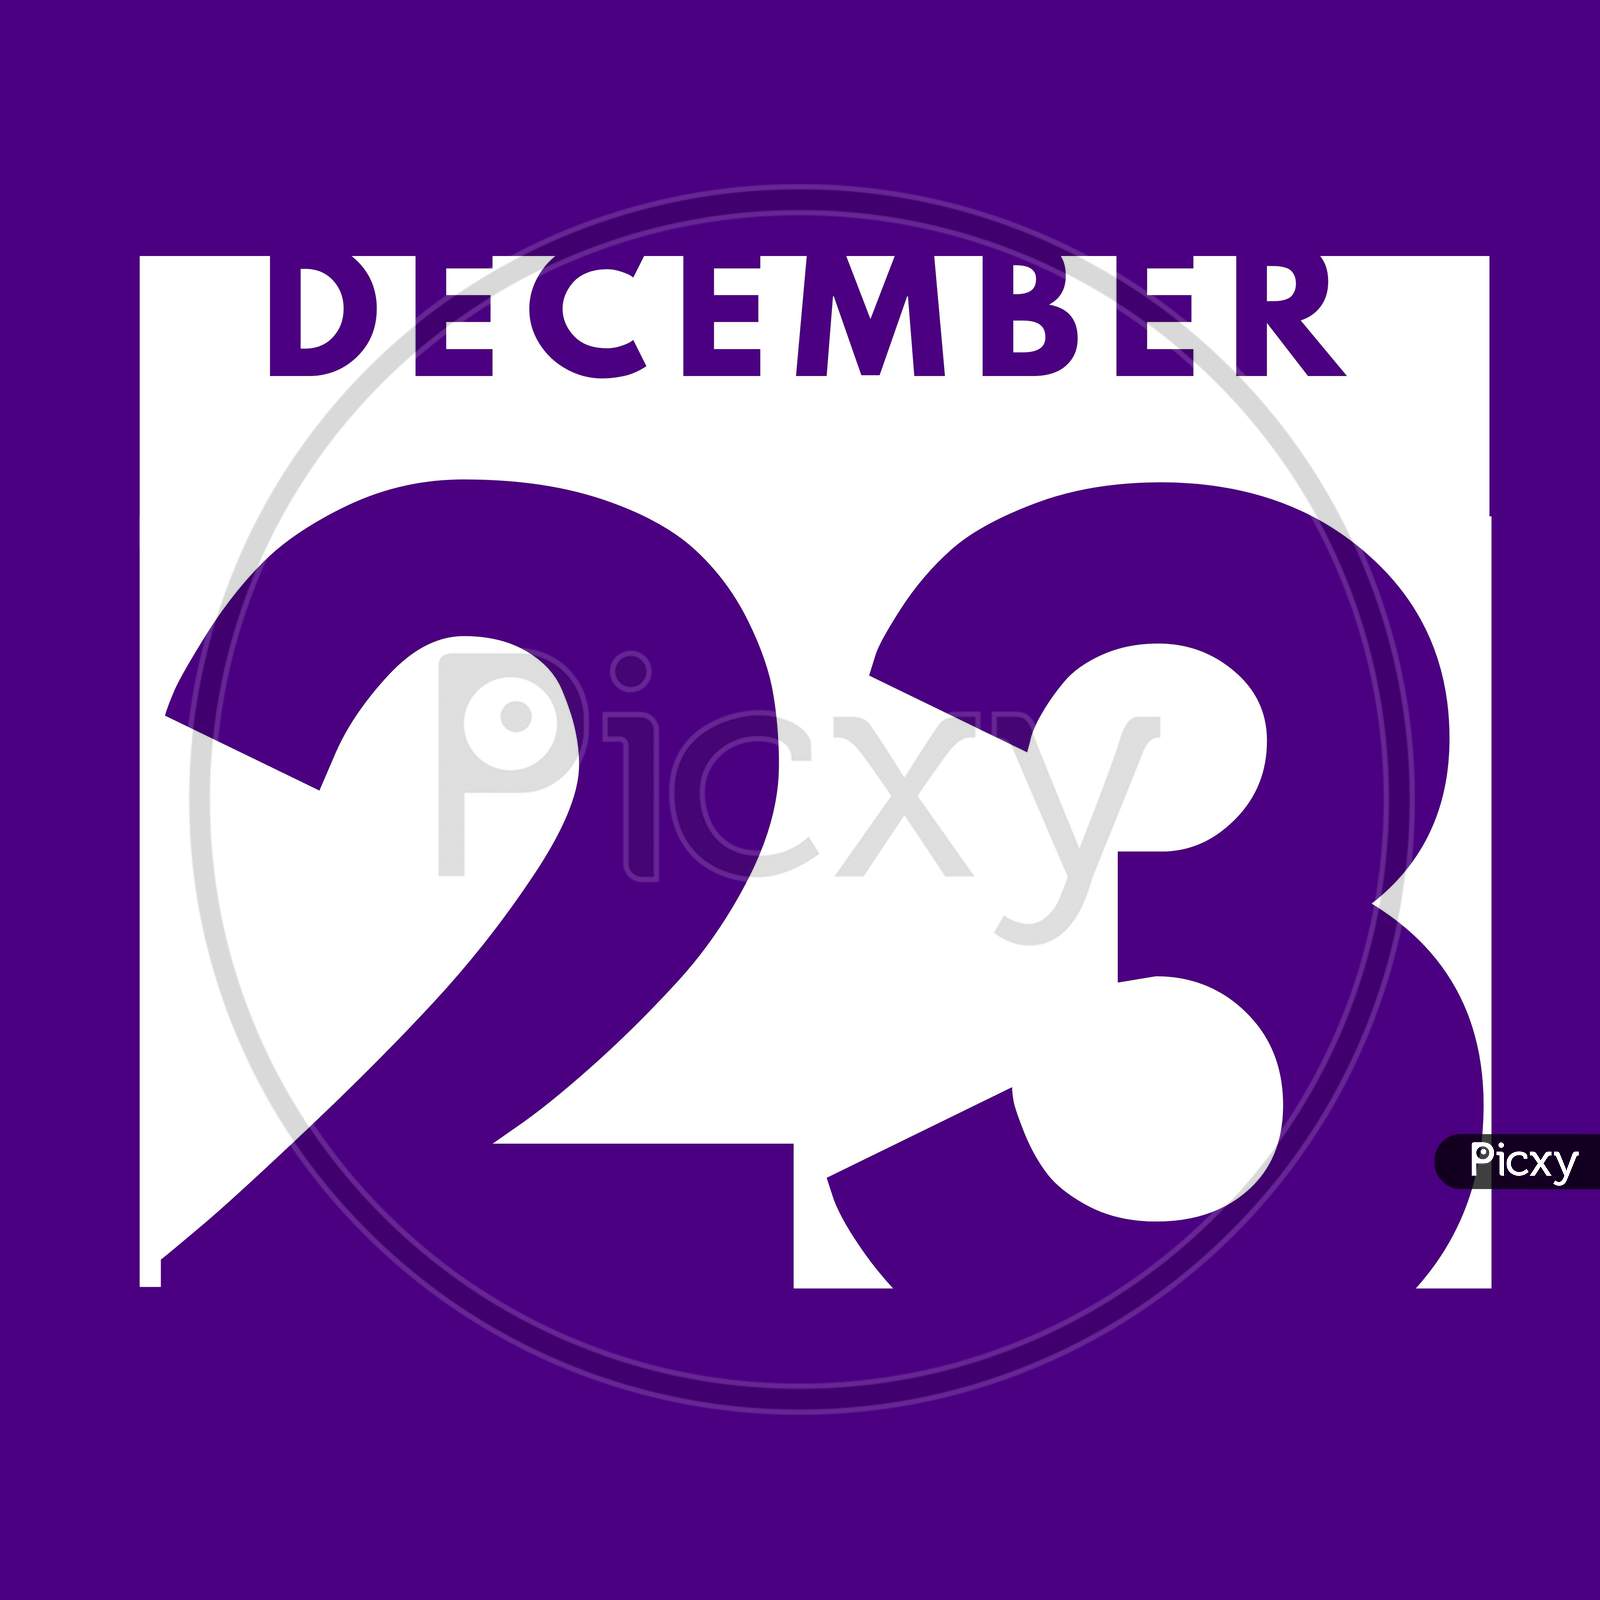 December 23 . Flat Modern Daily Calendar Icon .Date ,Day, Month .Calendar For The Month Of December